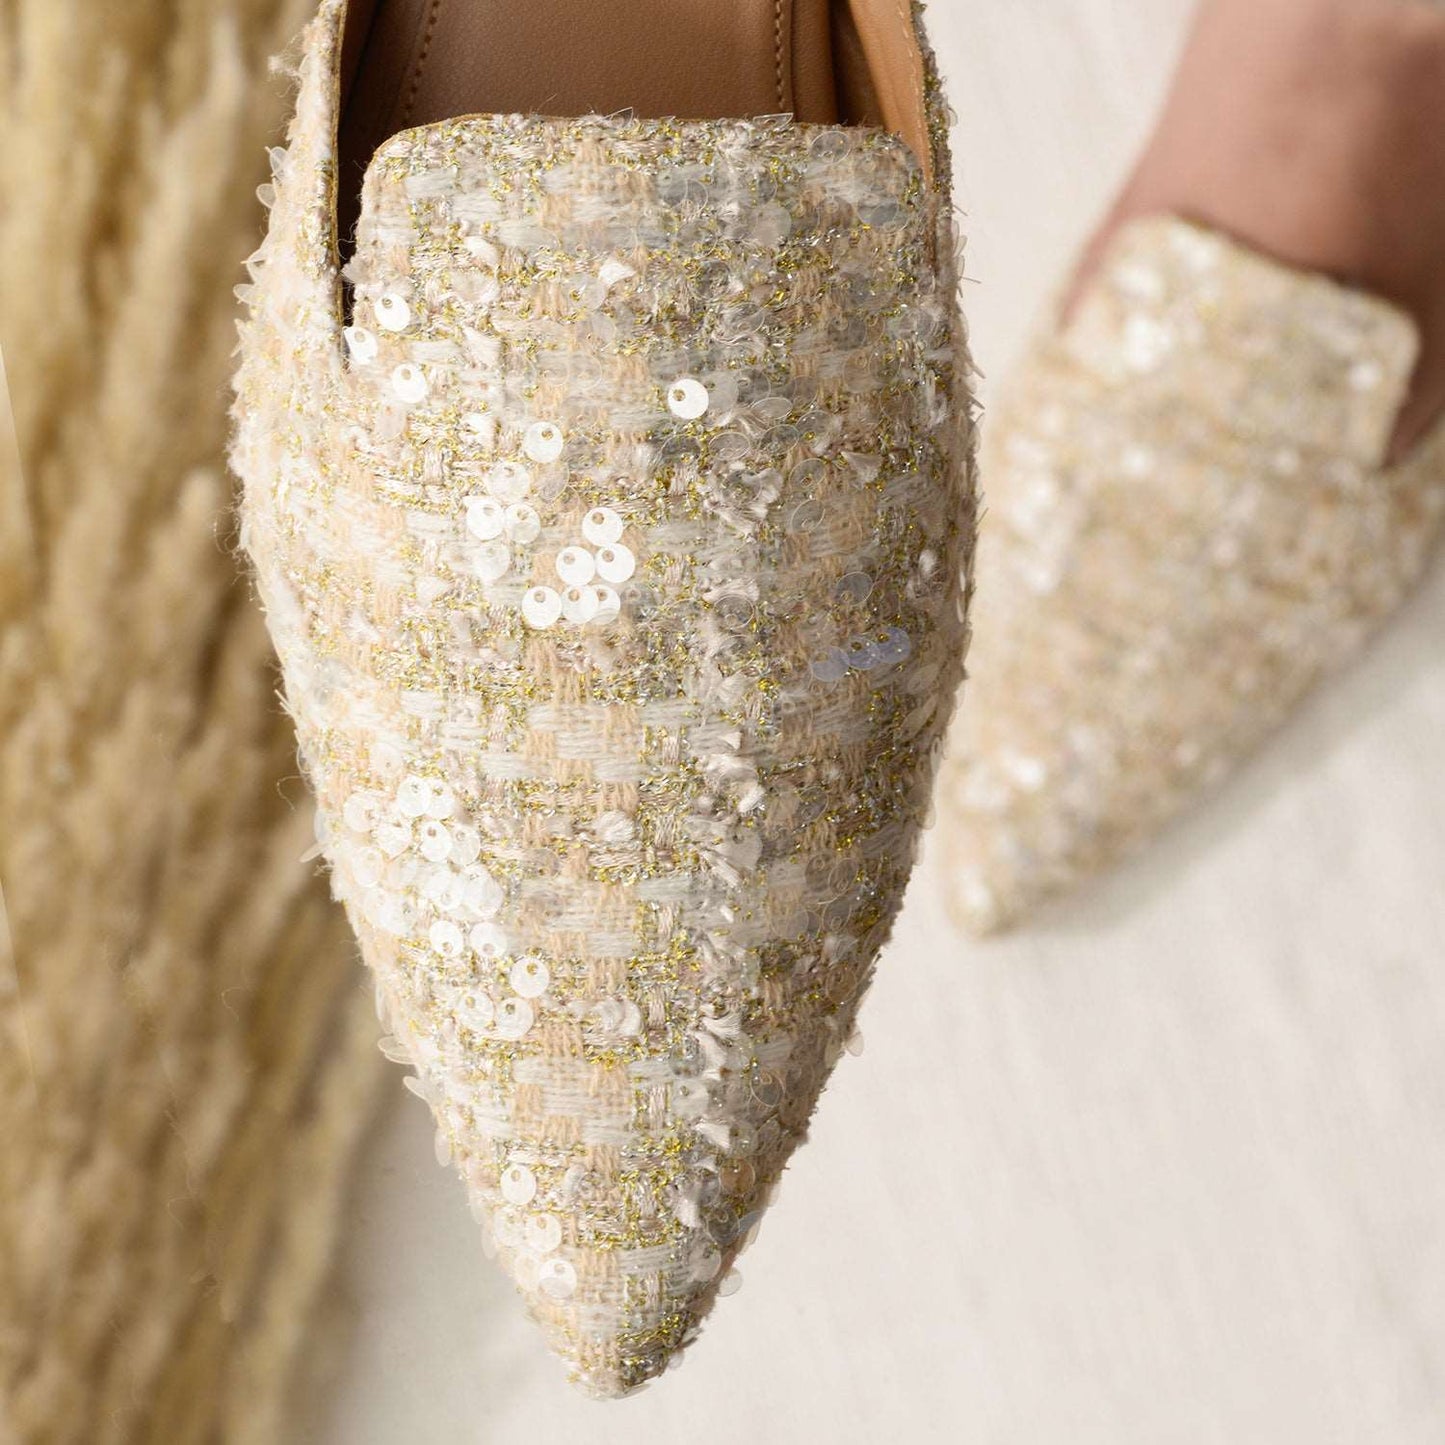 Ivory Intrigue Mules